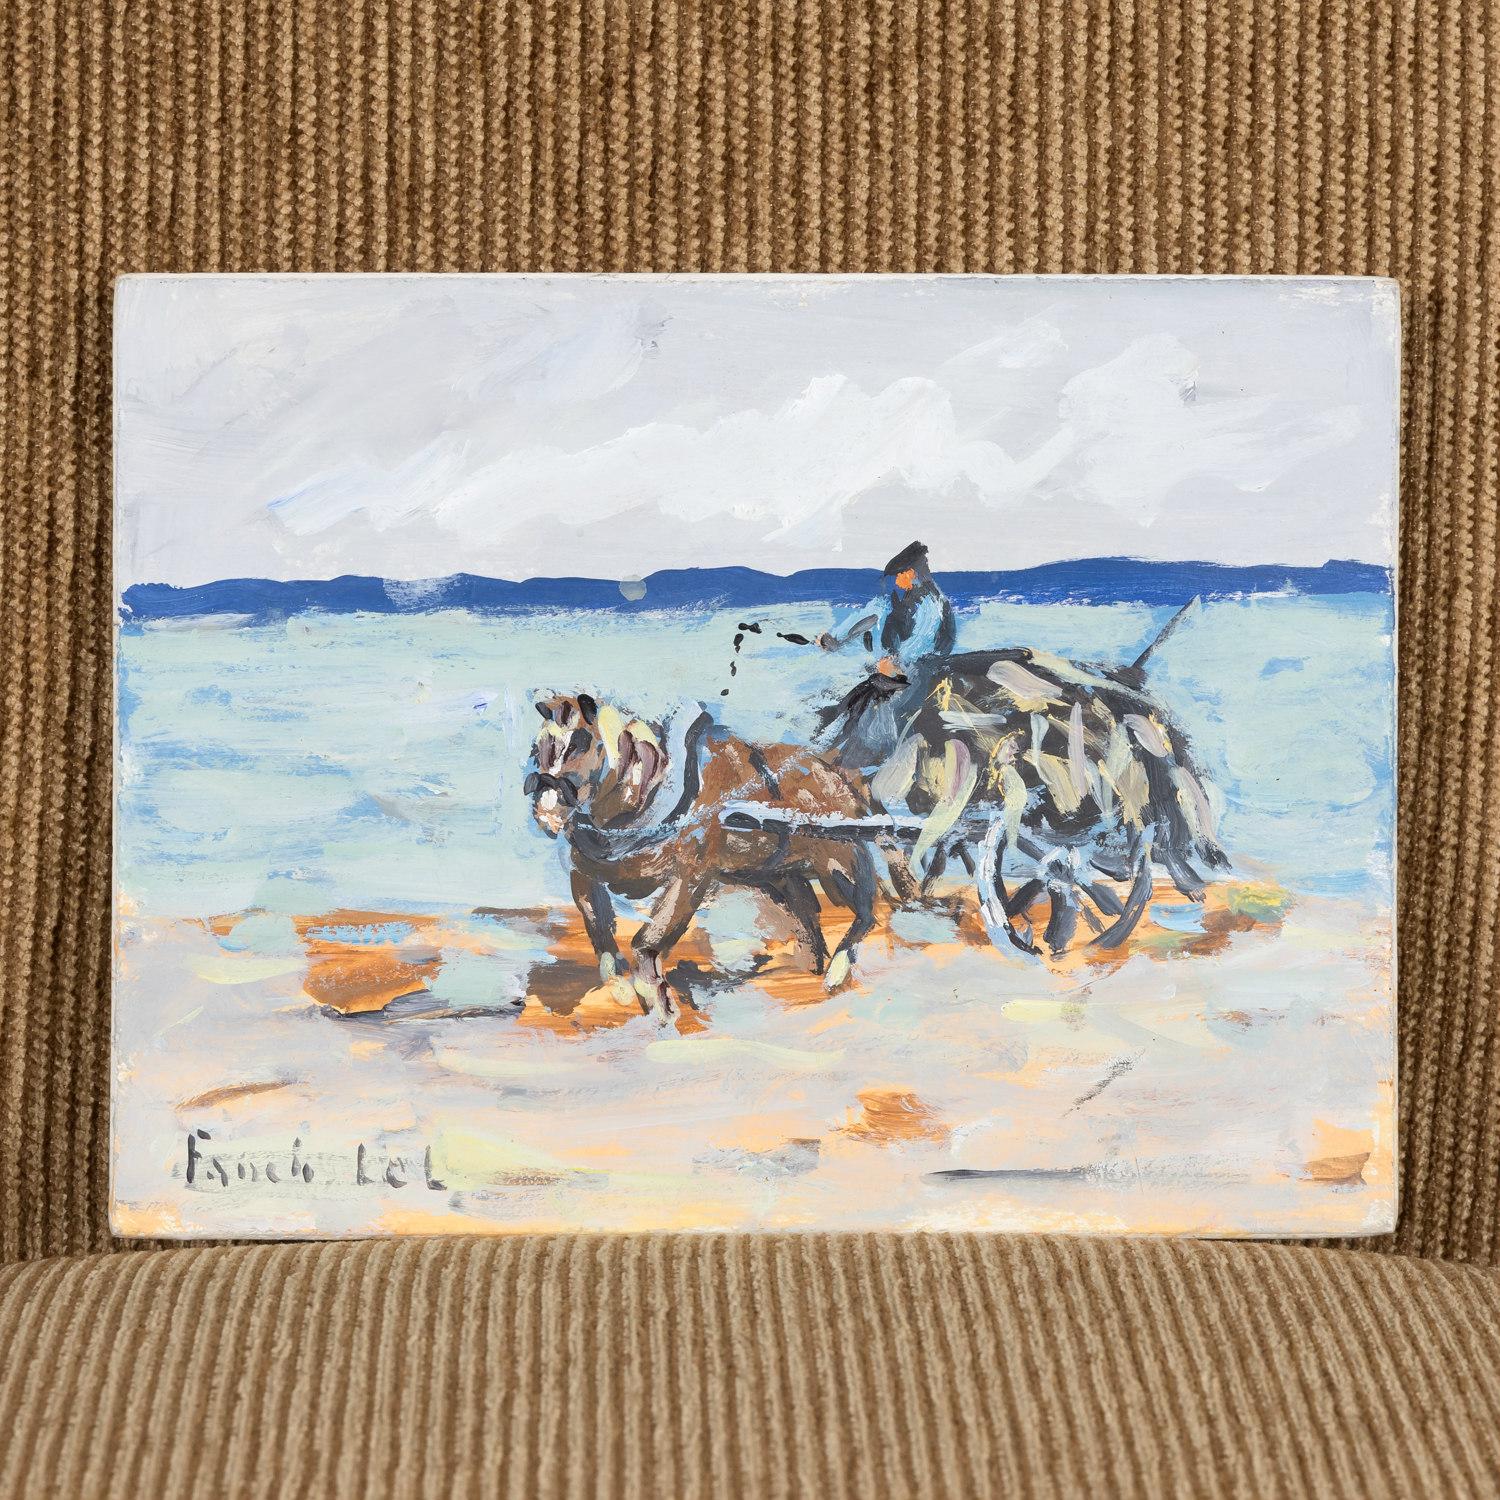 Goémonier à Avranches is a small seaside gouache on board painting by French Breton artist Fanch Lel. Featuring a vibrant palette made of blue, grey, brown, white, and orange tones, the painting depicts a French goémonier, a beach cleaner or seaweed